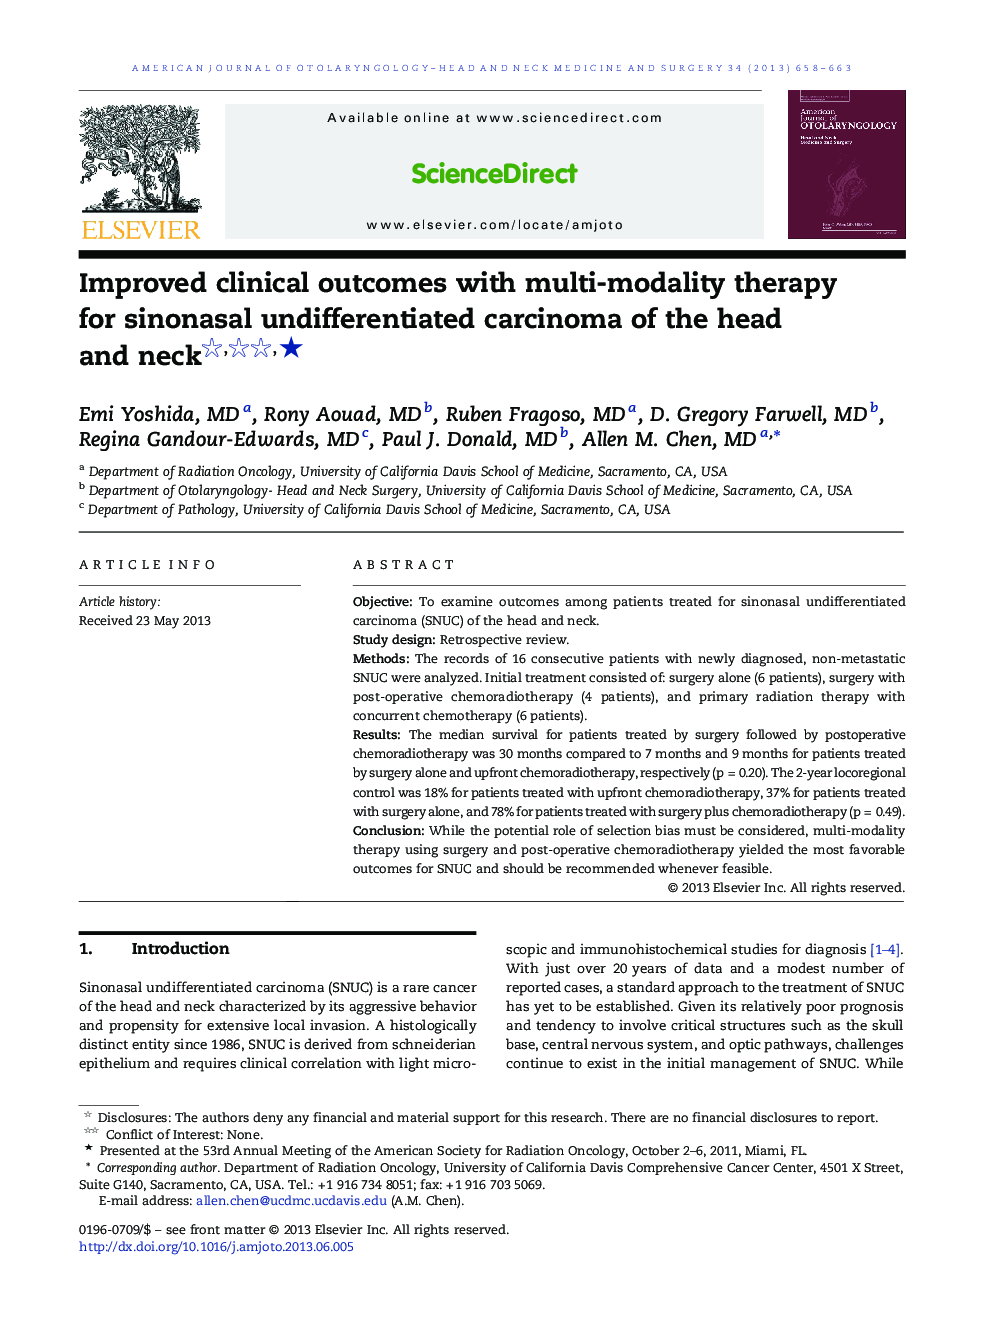 Improved clinical outcomes with multi-modality therapy for sinonasal undifferentiated carcinoma of the head and neck ★